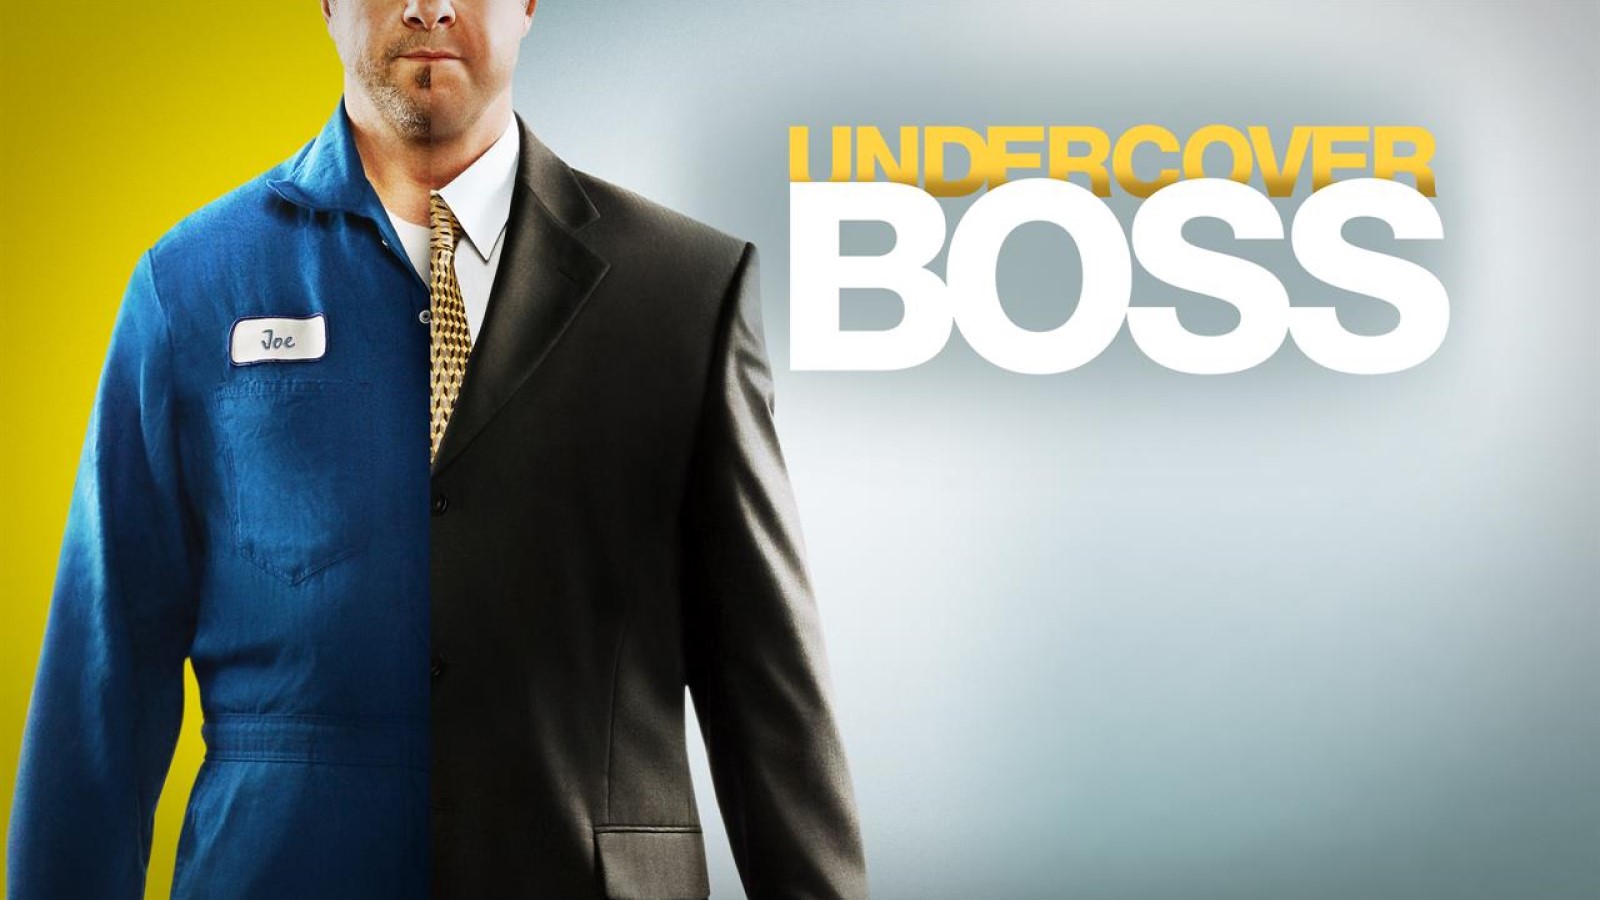 How to Watch 'Undercover Boss' Online 